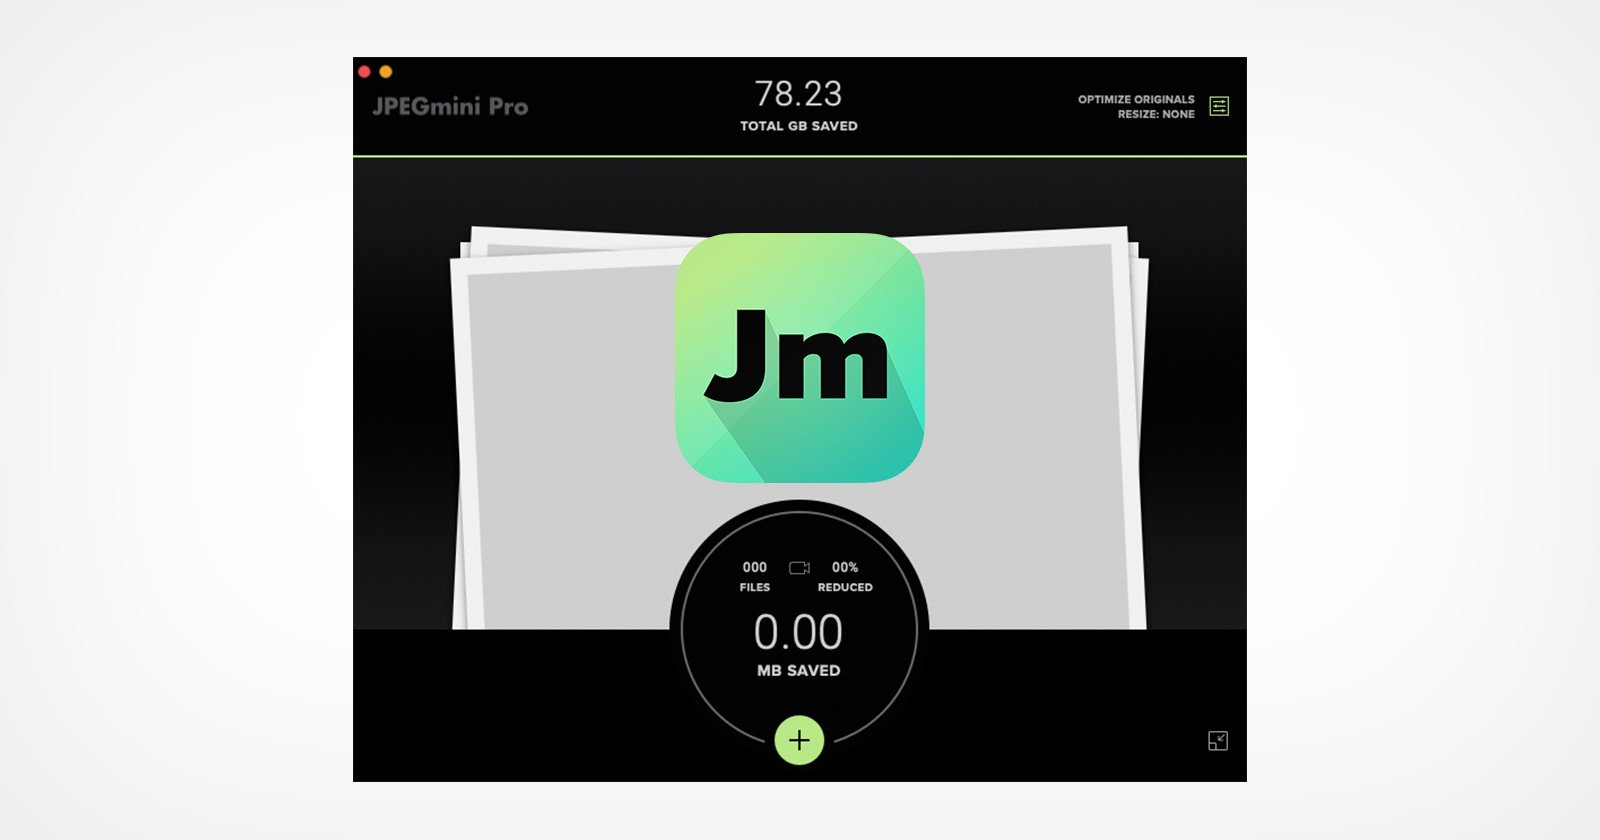  jpegmini adds more video resize options improves 